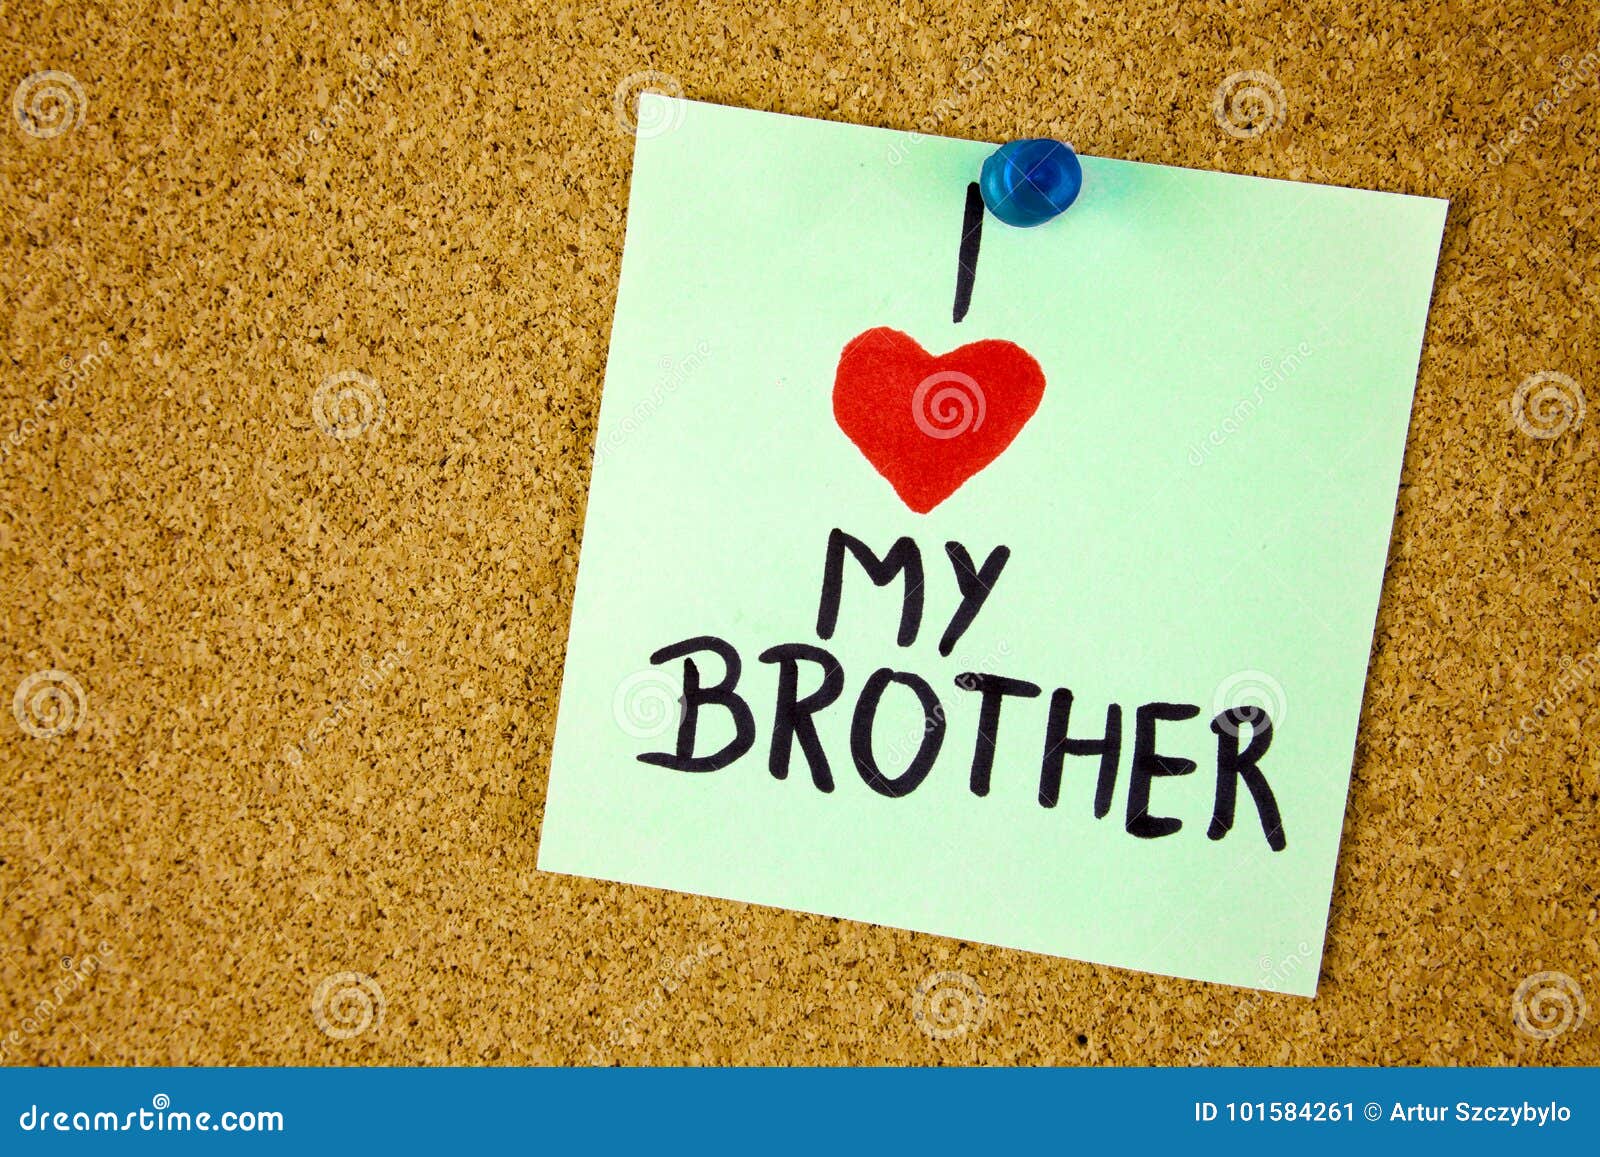 My brother love To My